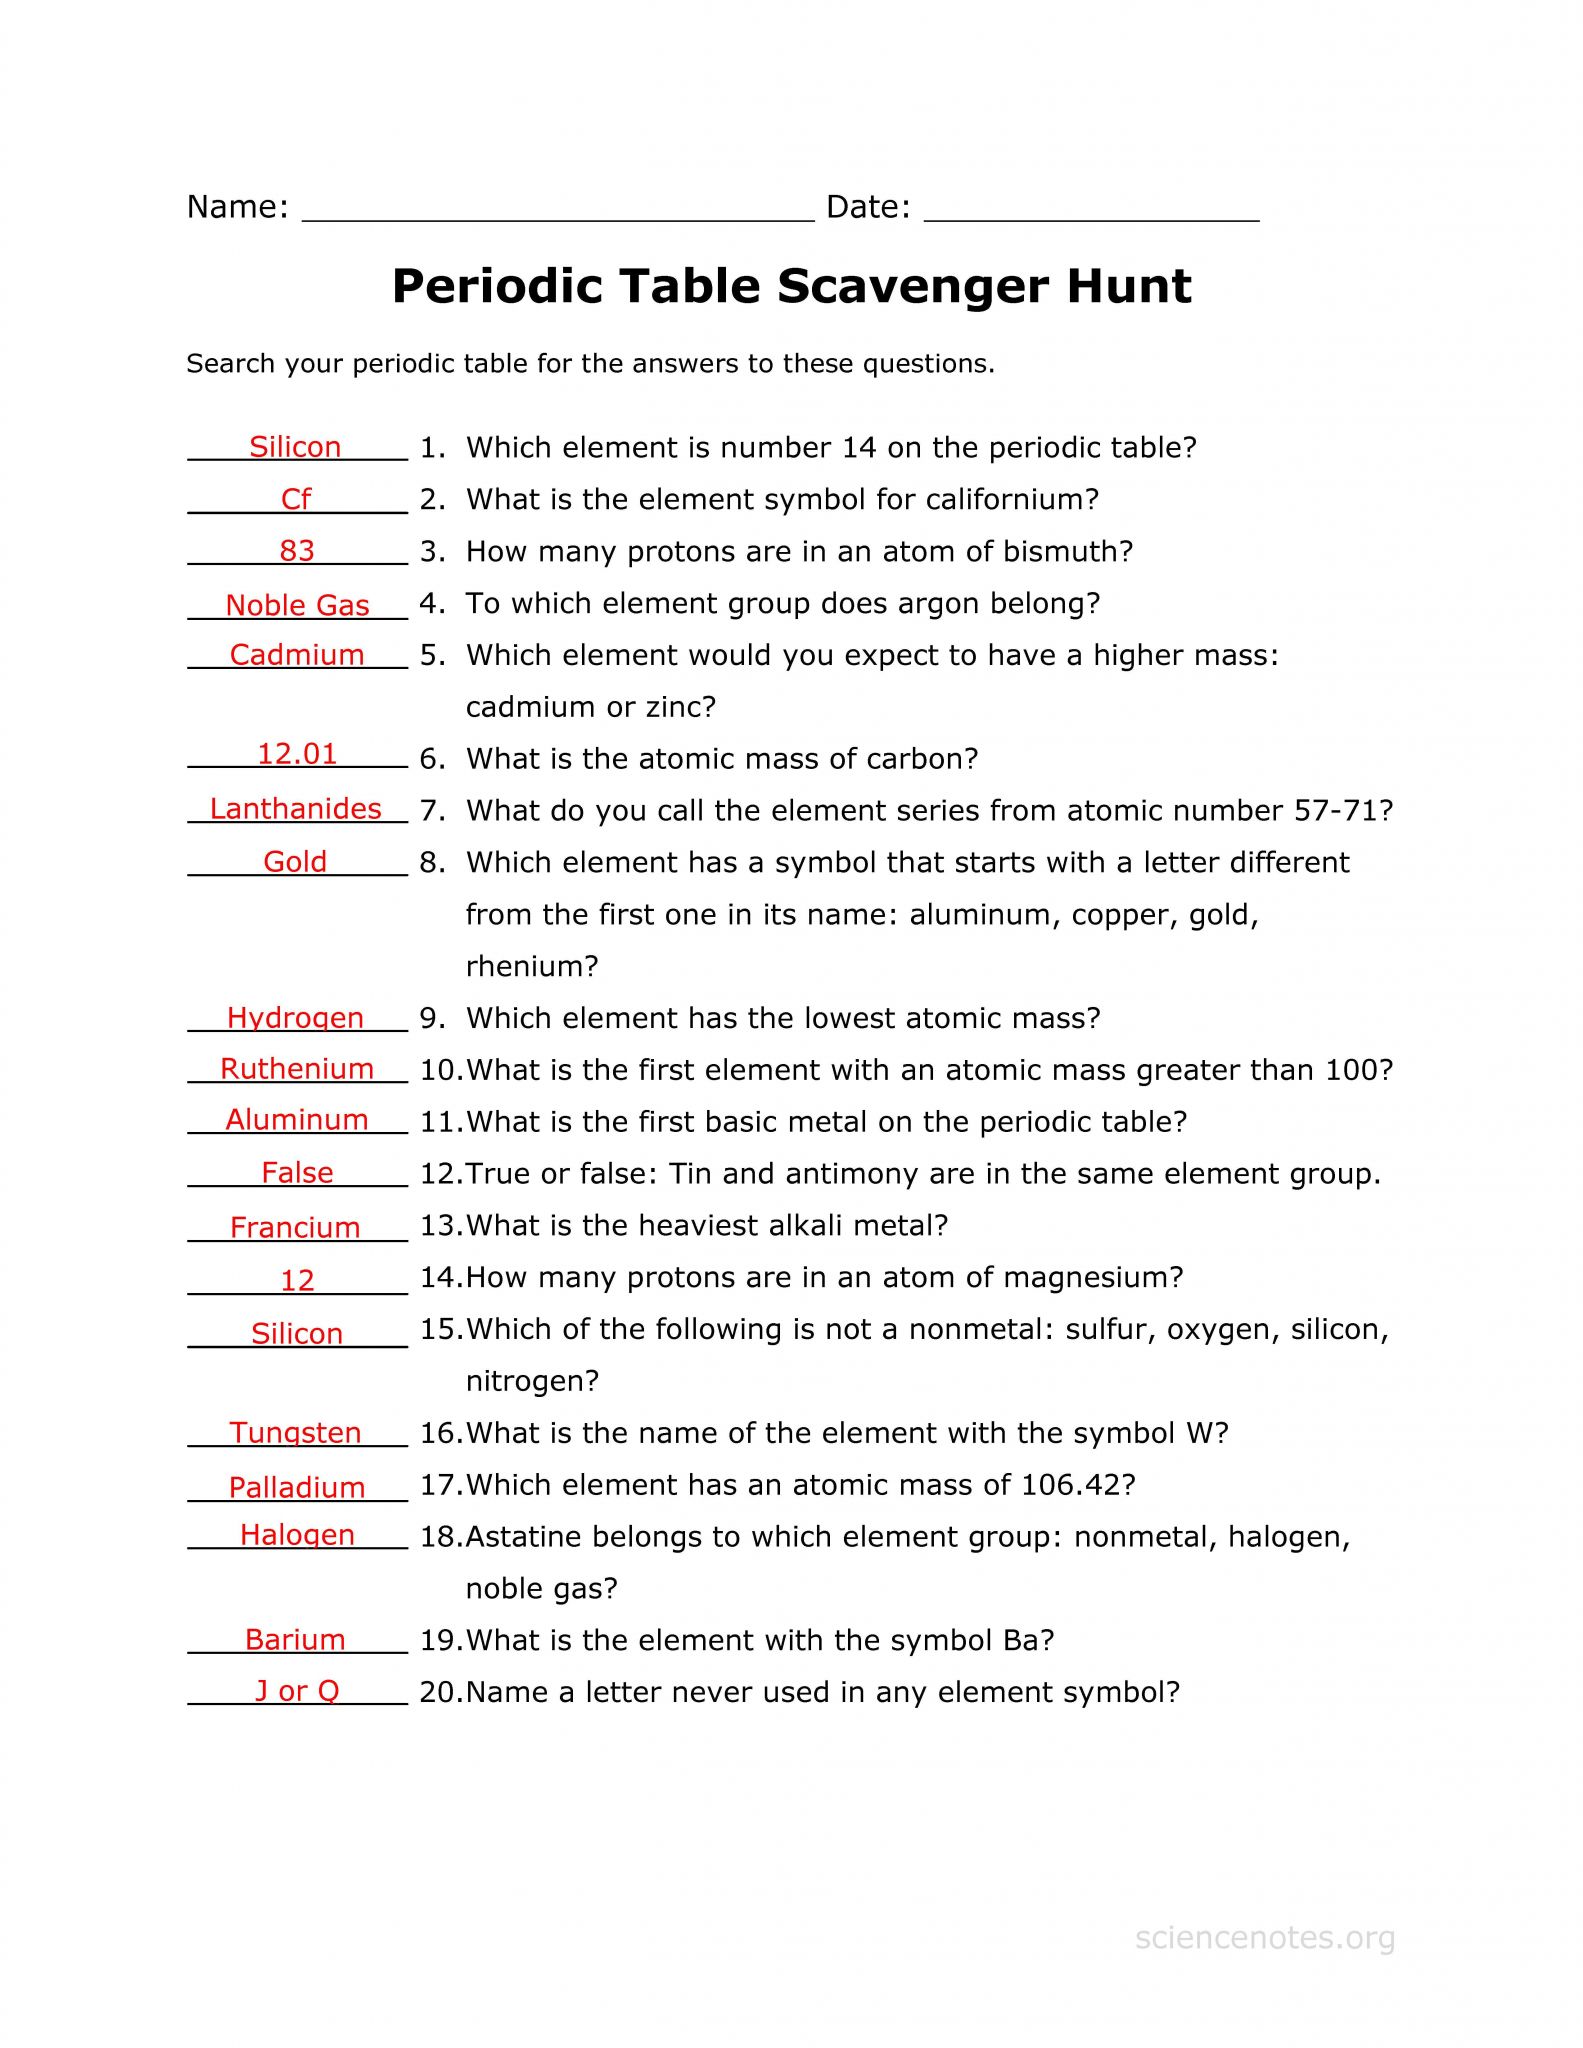 Types Of Chemical Reactions Worksheet Answers together with Answer Key to the Periodic Table Scavenger Hunt Worksheet Related